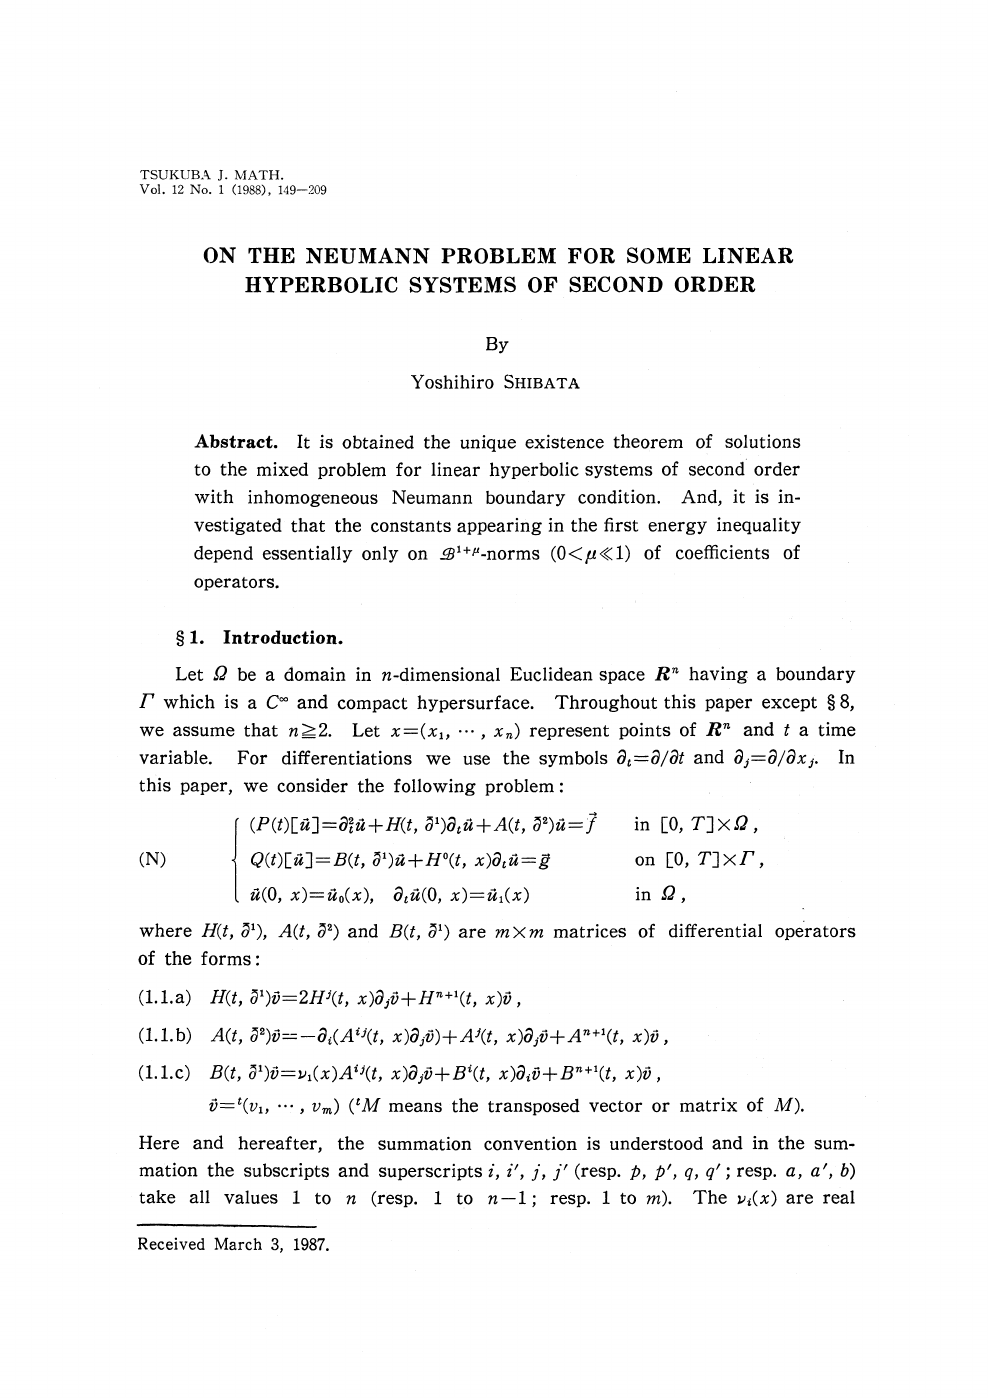 On The Neumann Problem For Some Linear Hyperbolic Systems Of Second Order Topic Of Research Paper In Mathematics Download Scholarly Article Pdf And Read For Free On Cyberleninka Open Science Hub